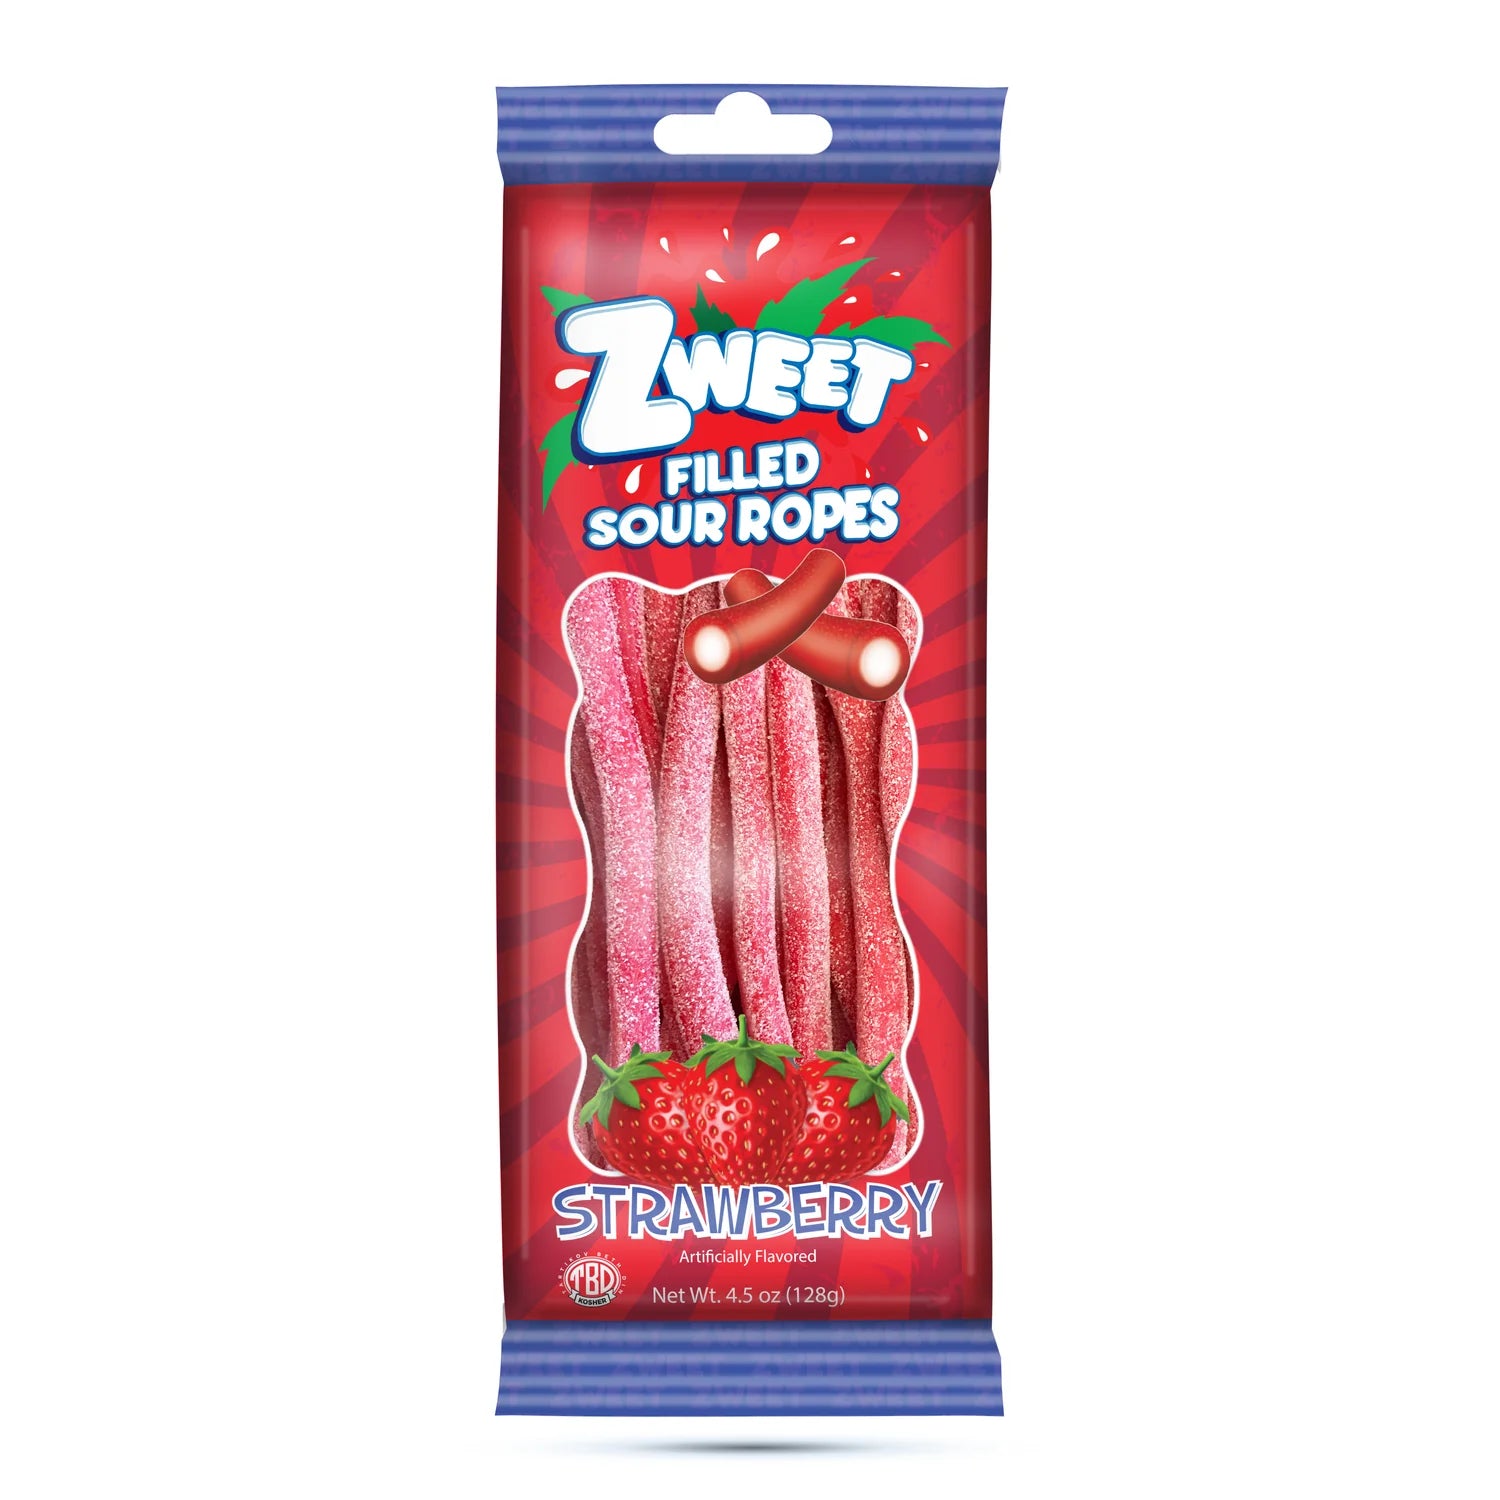 Zweet Sour Ropes Filled Strawberry